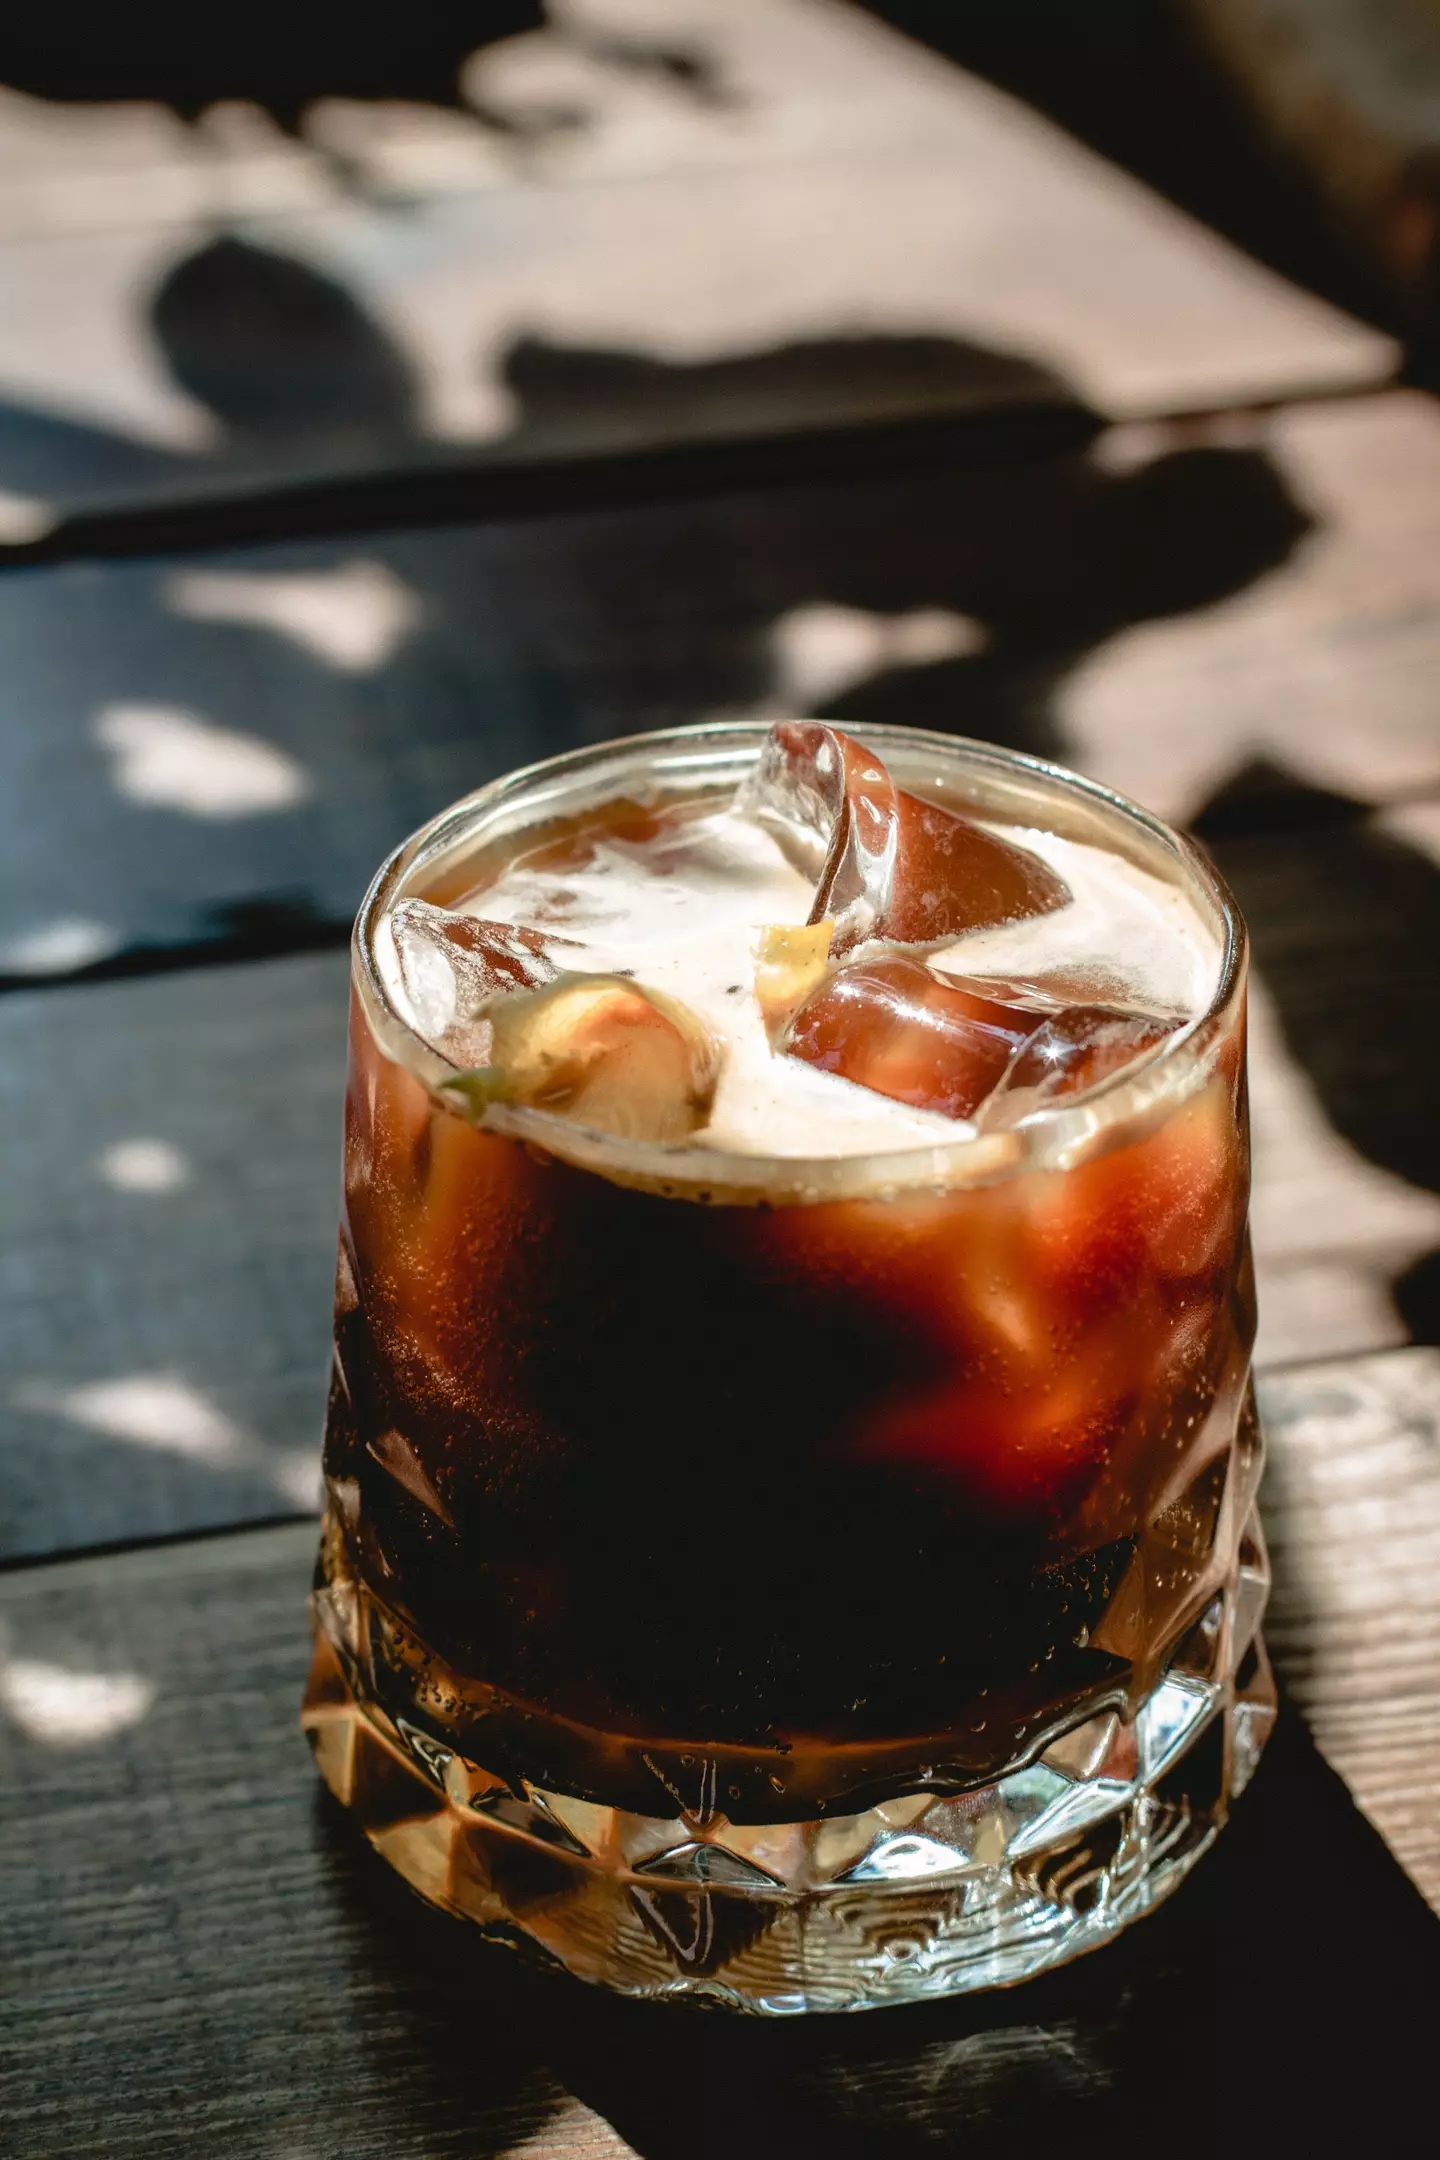 You might want to think twice before you mix your booze with cola.